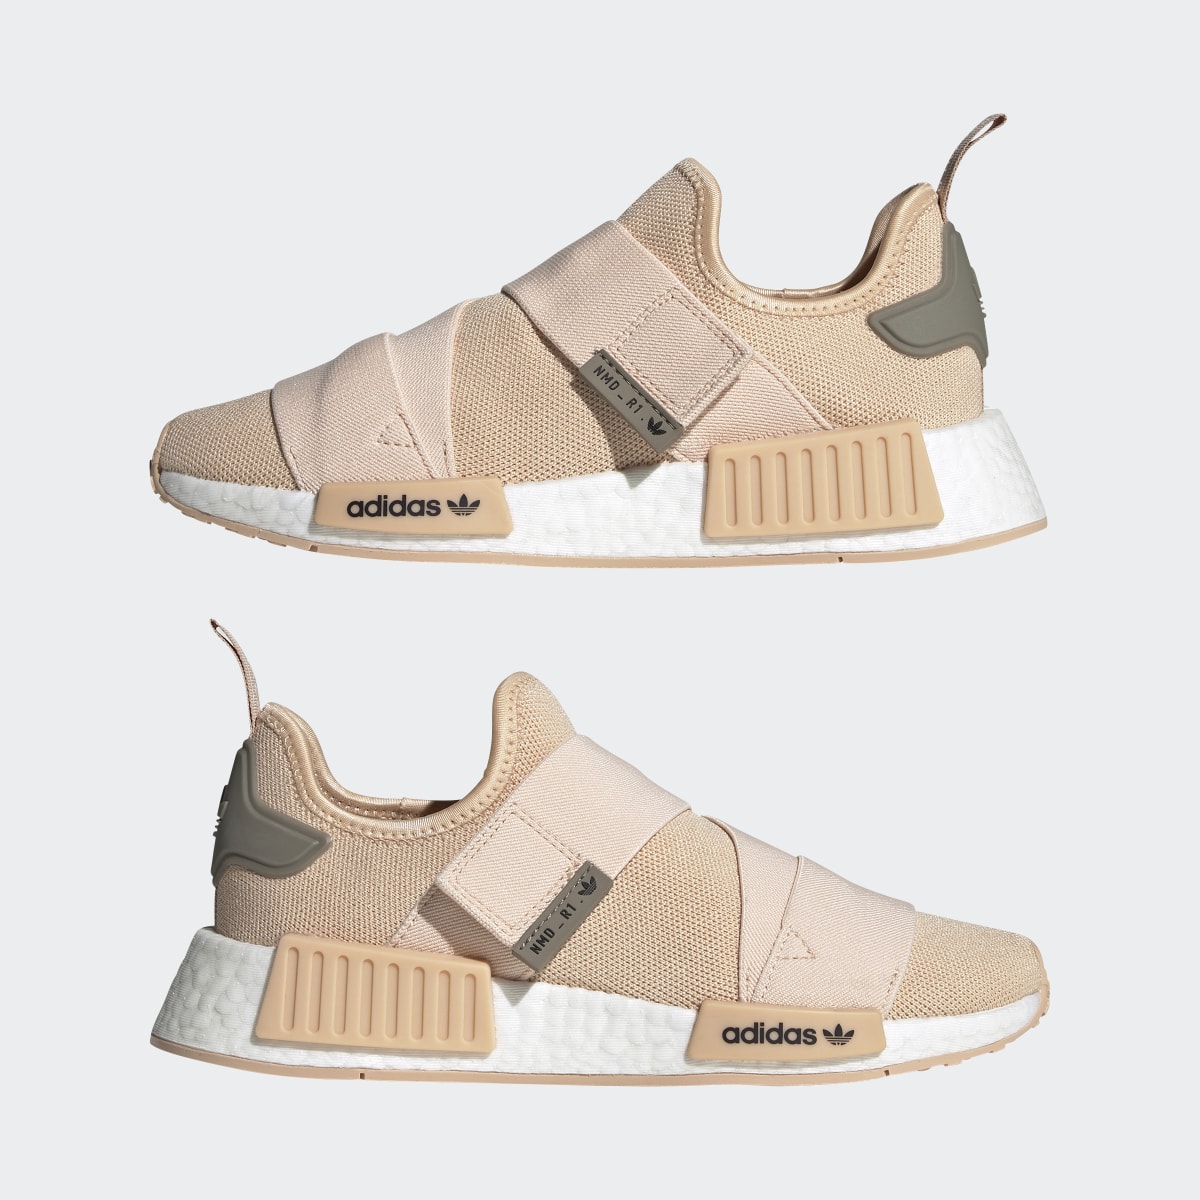 Adidas NMD_R1 Strap Shoes. 8